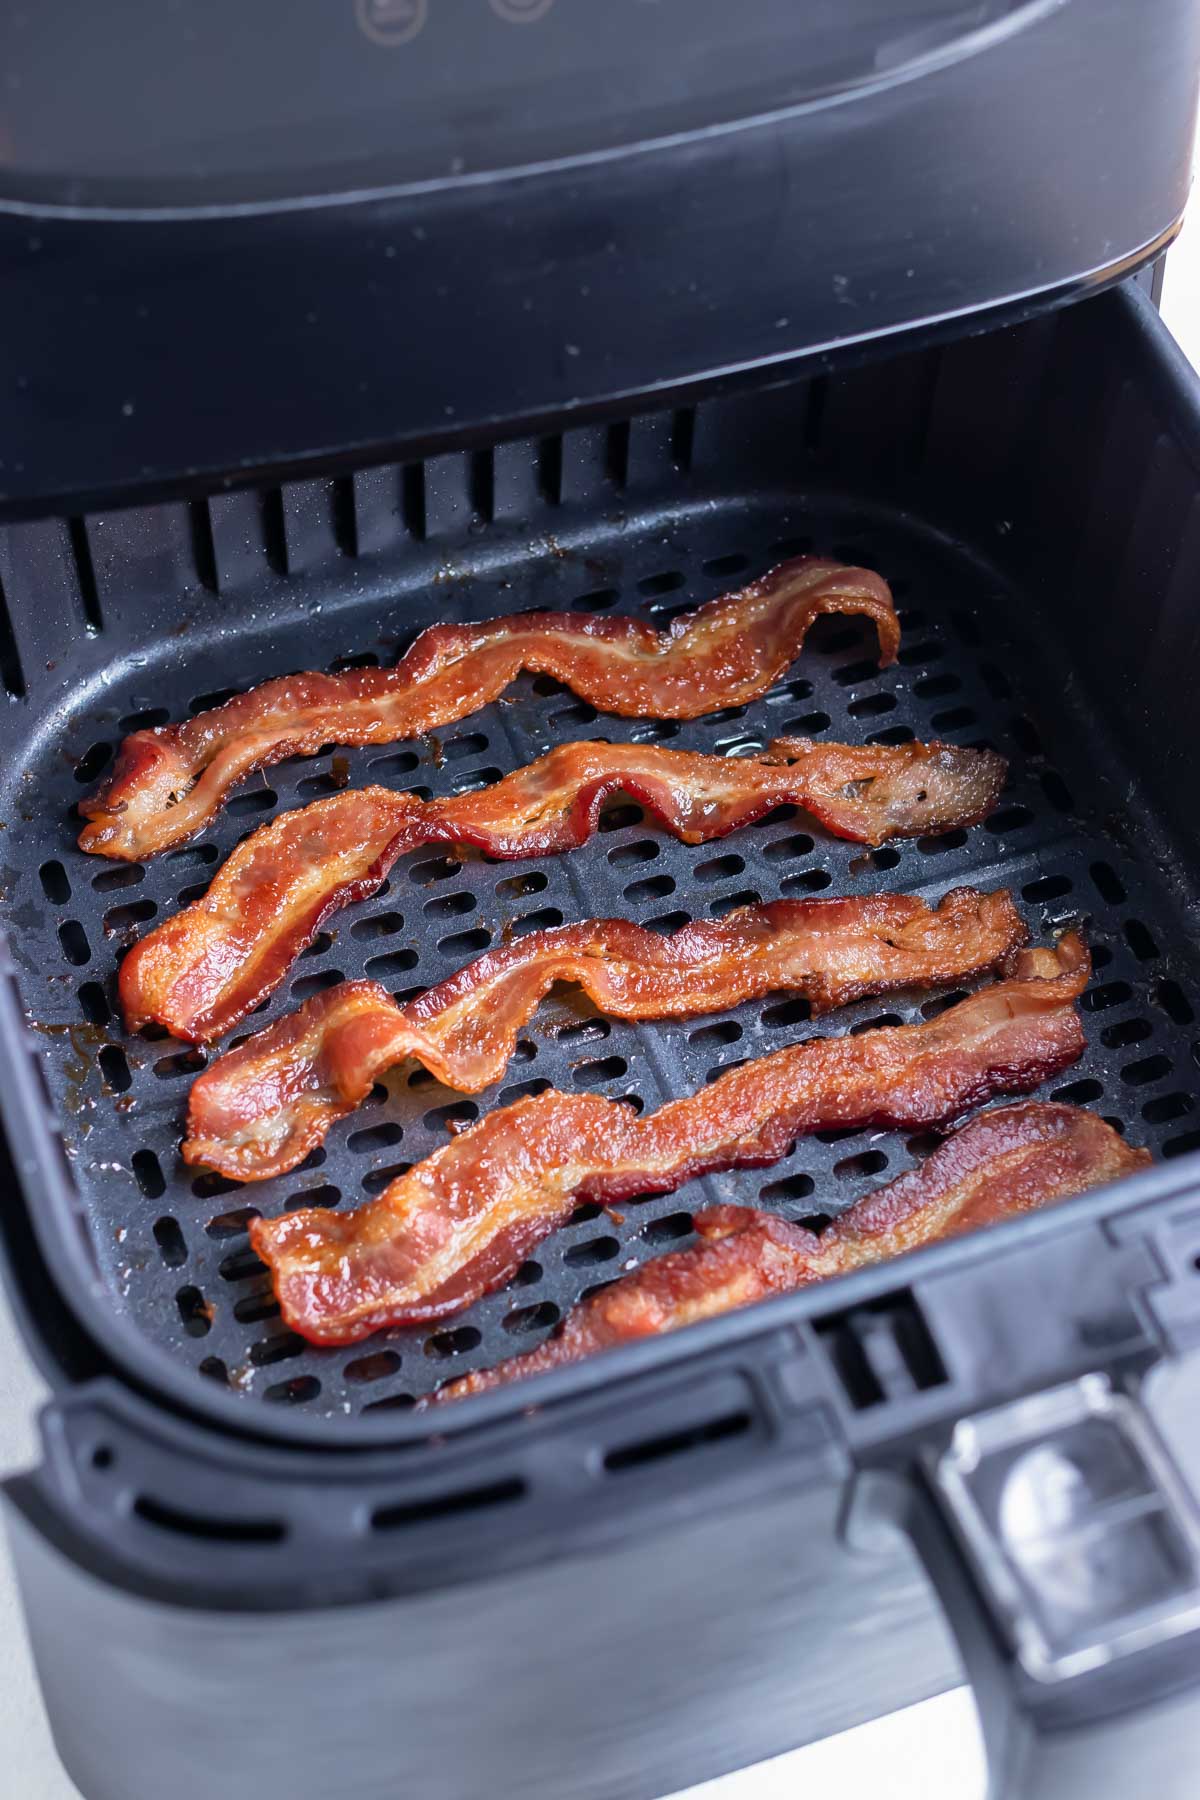 Bacon is cooked in the air fryer until crispy.